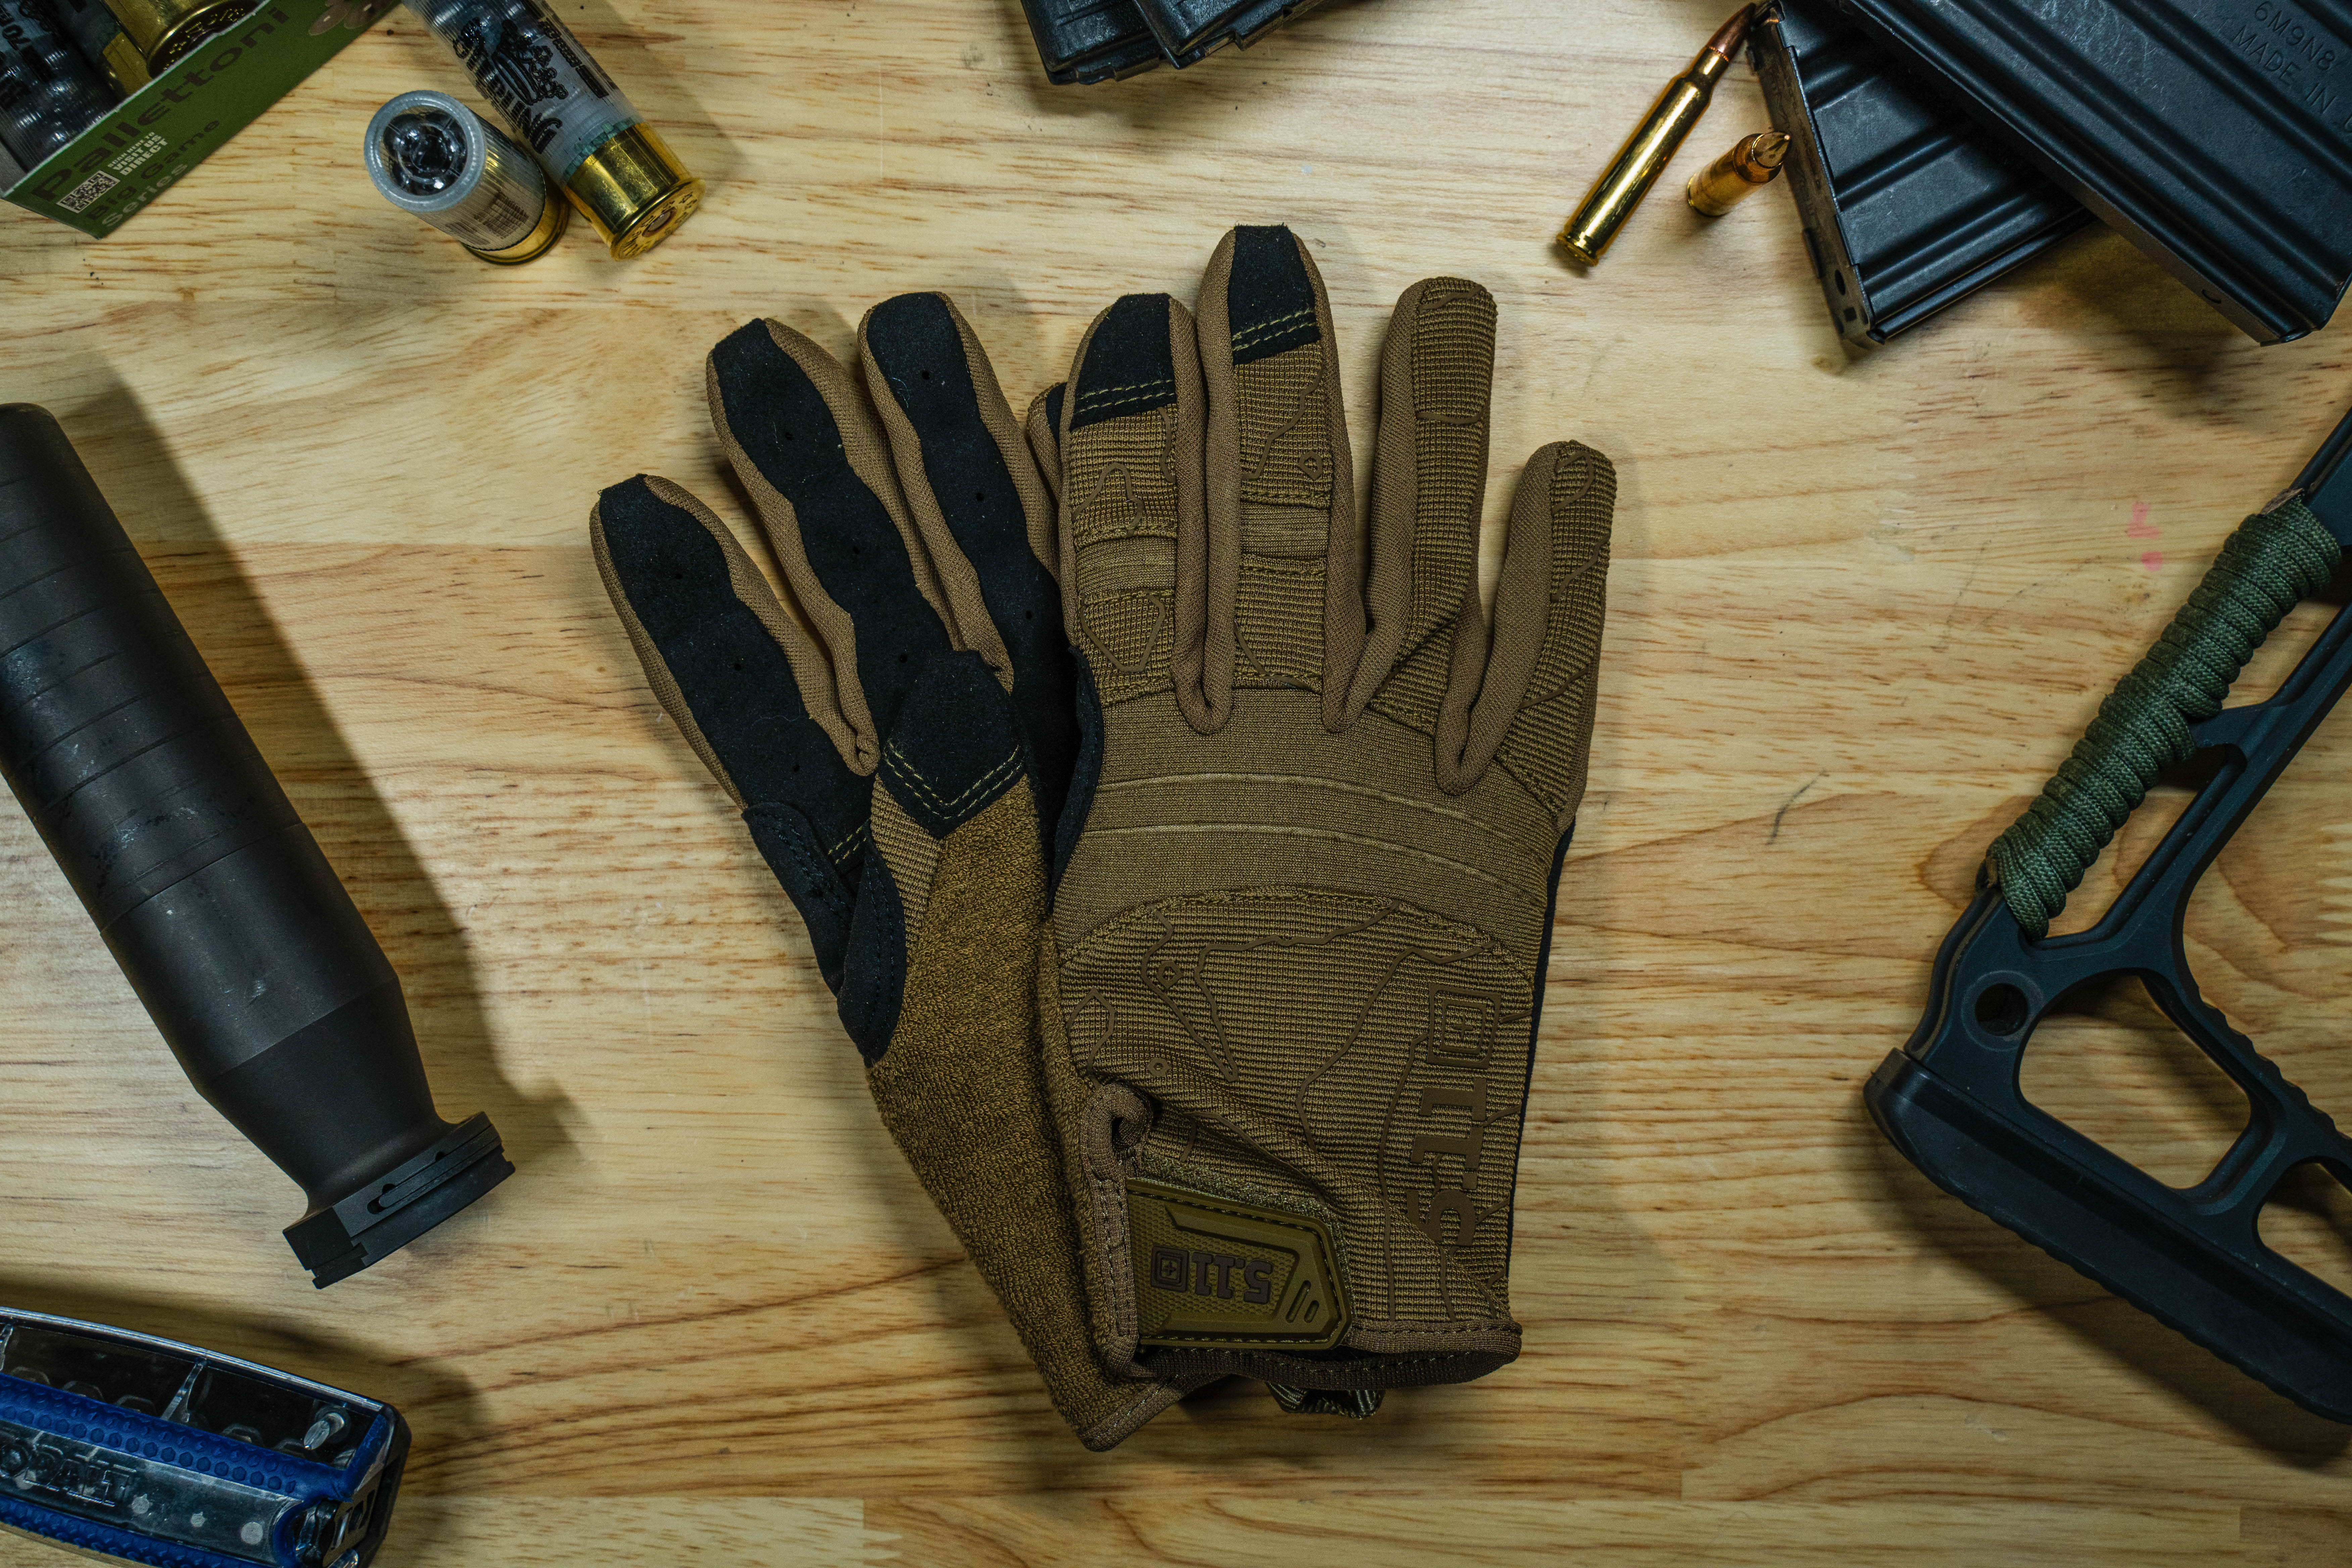 5.11 tactical gloves